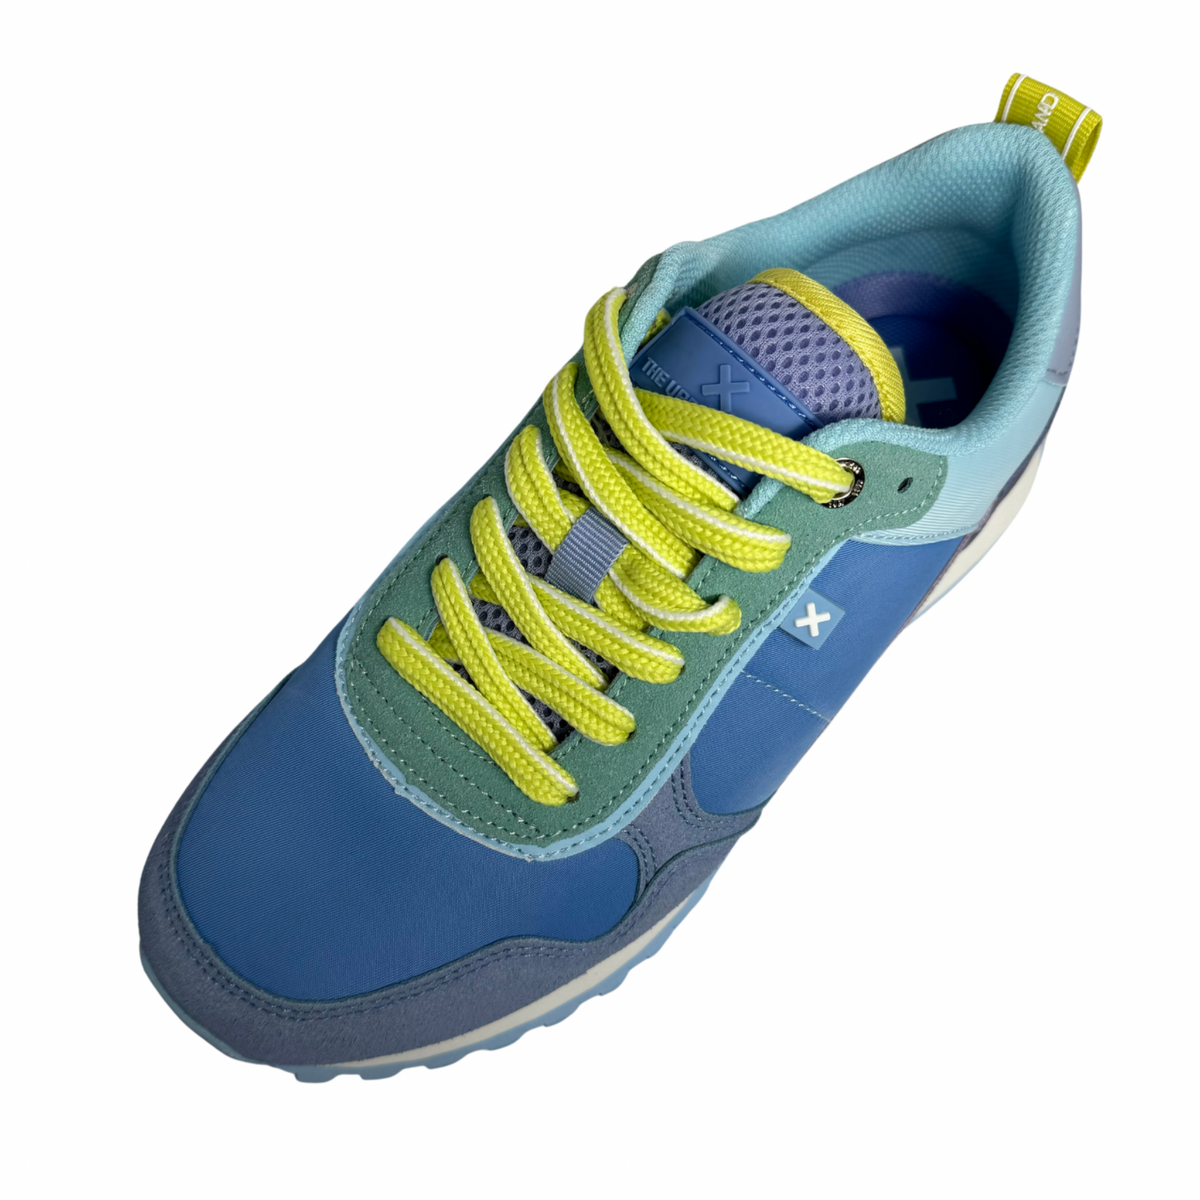 Xti Two Toned Blue Trainers